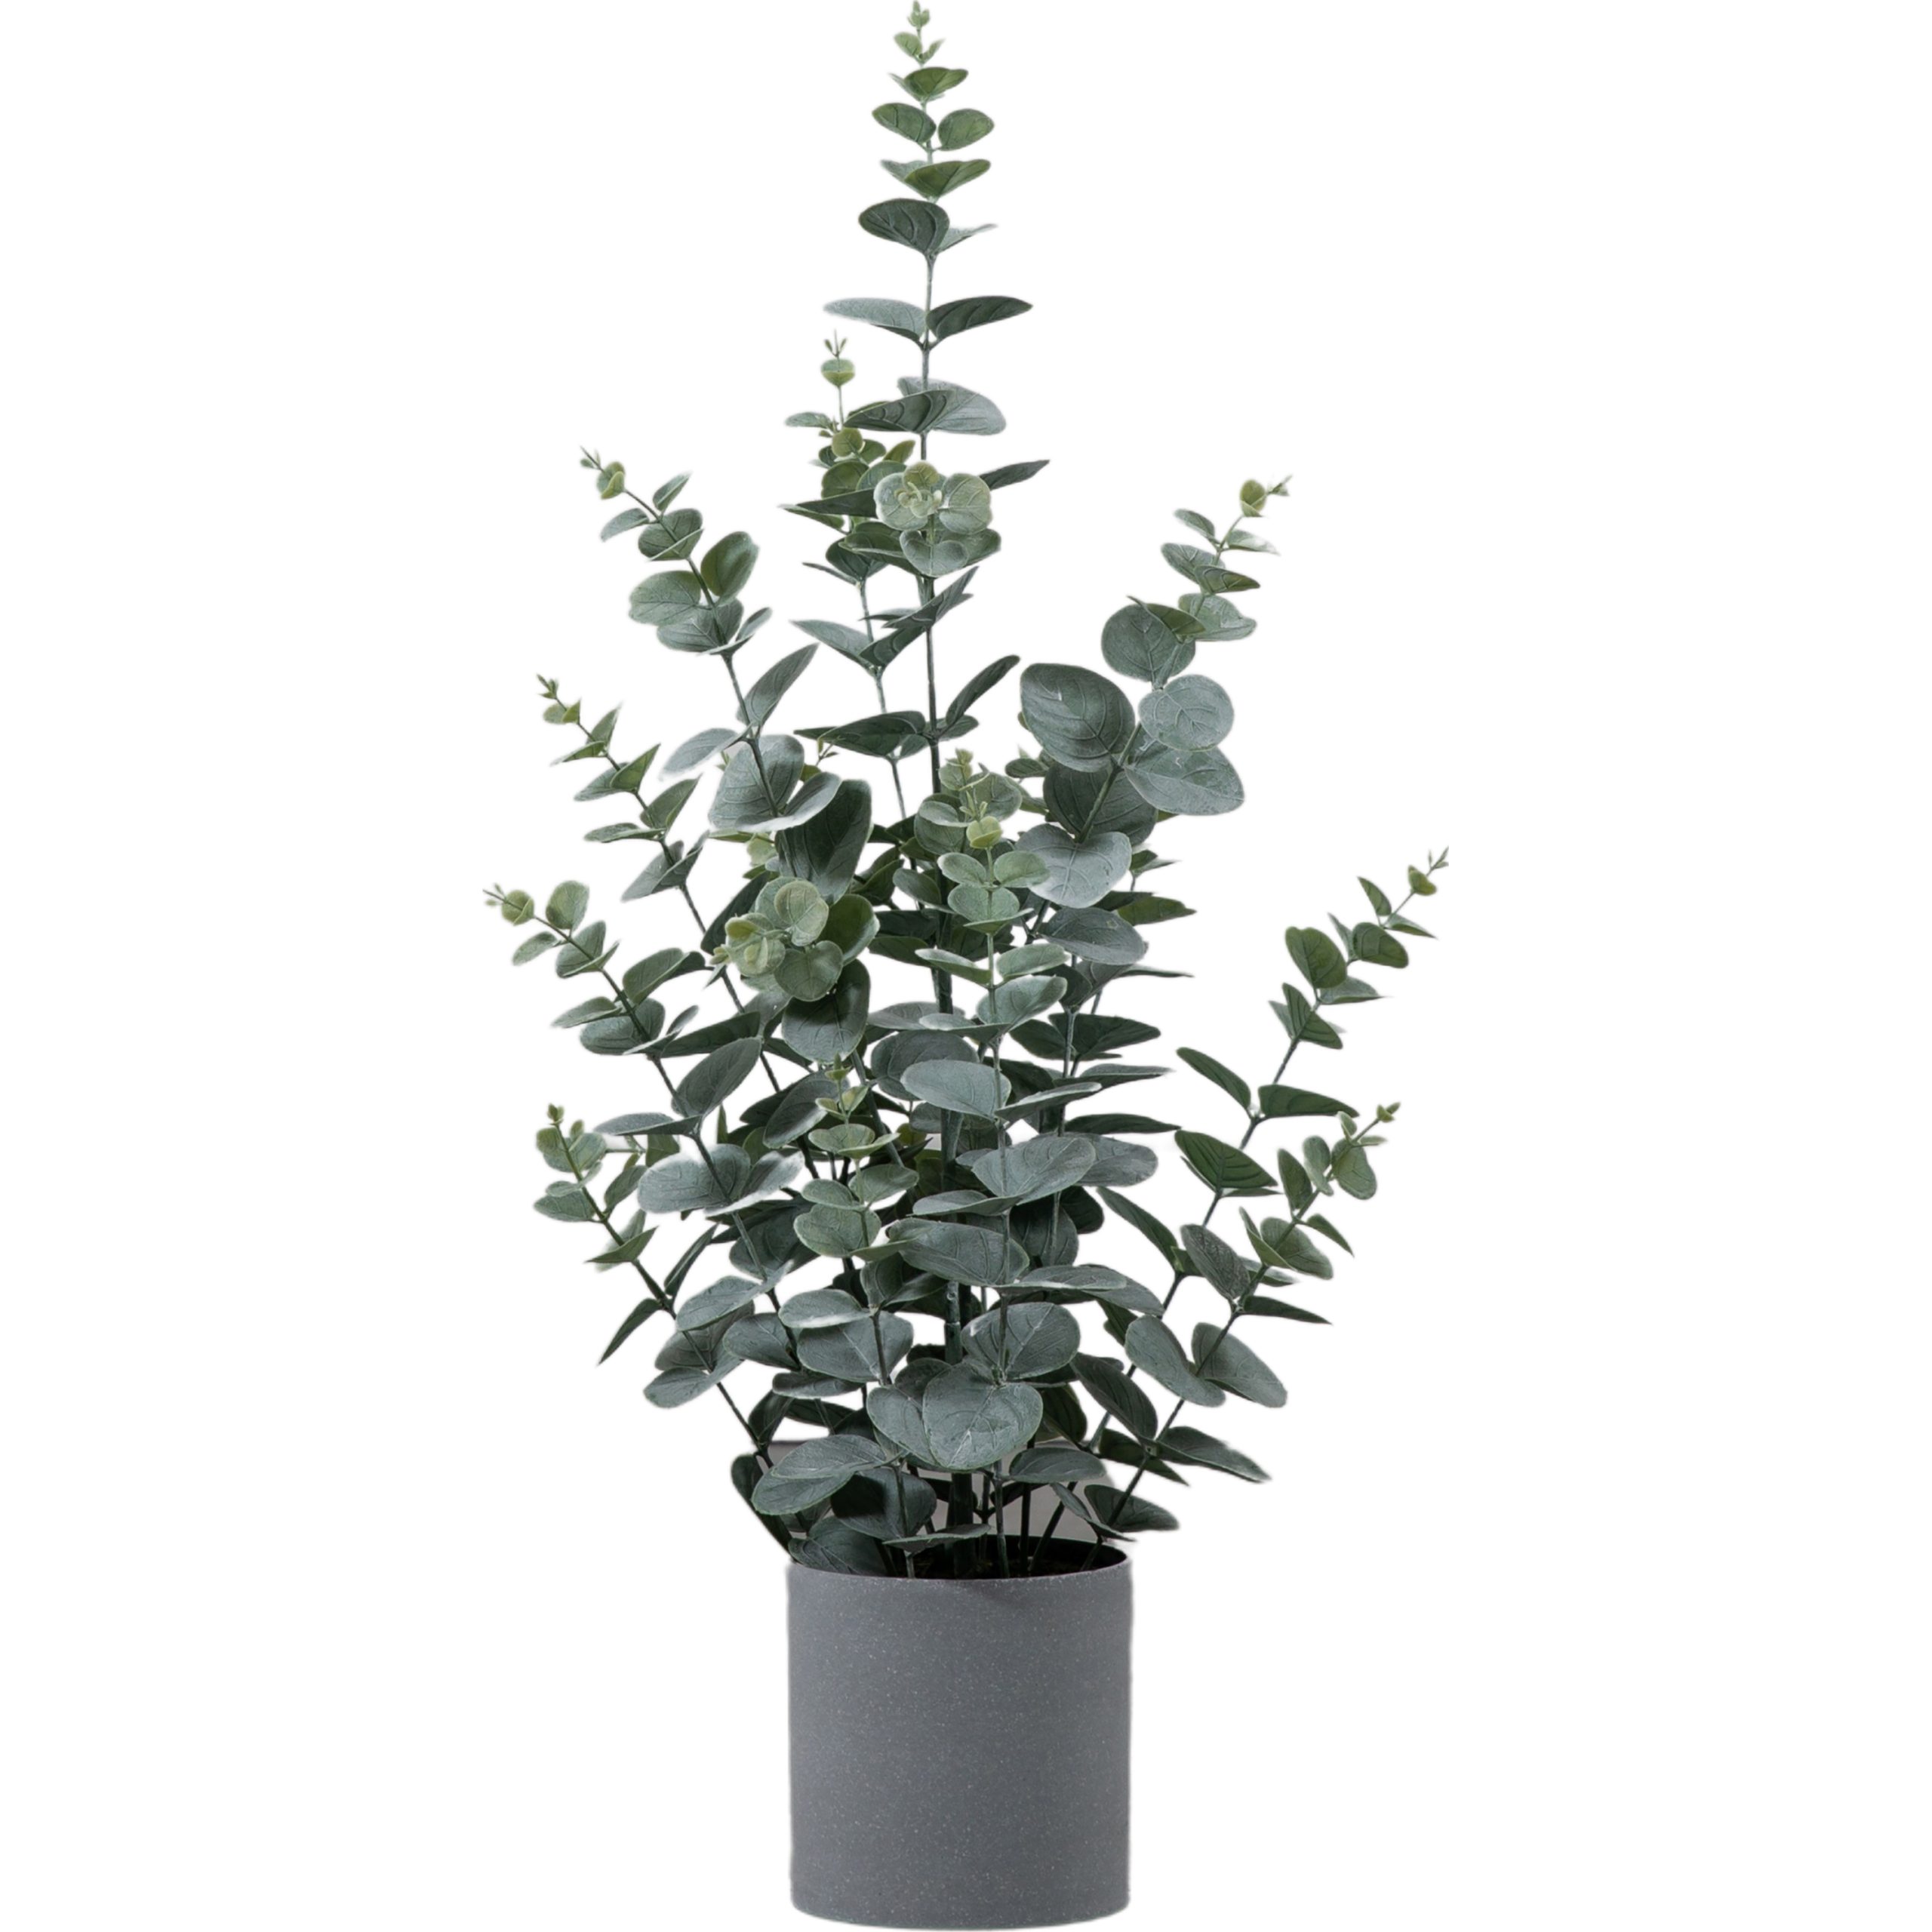 Gallery Direct Potted Eucalyptus Bush Green